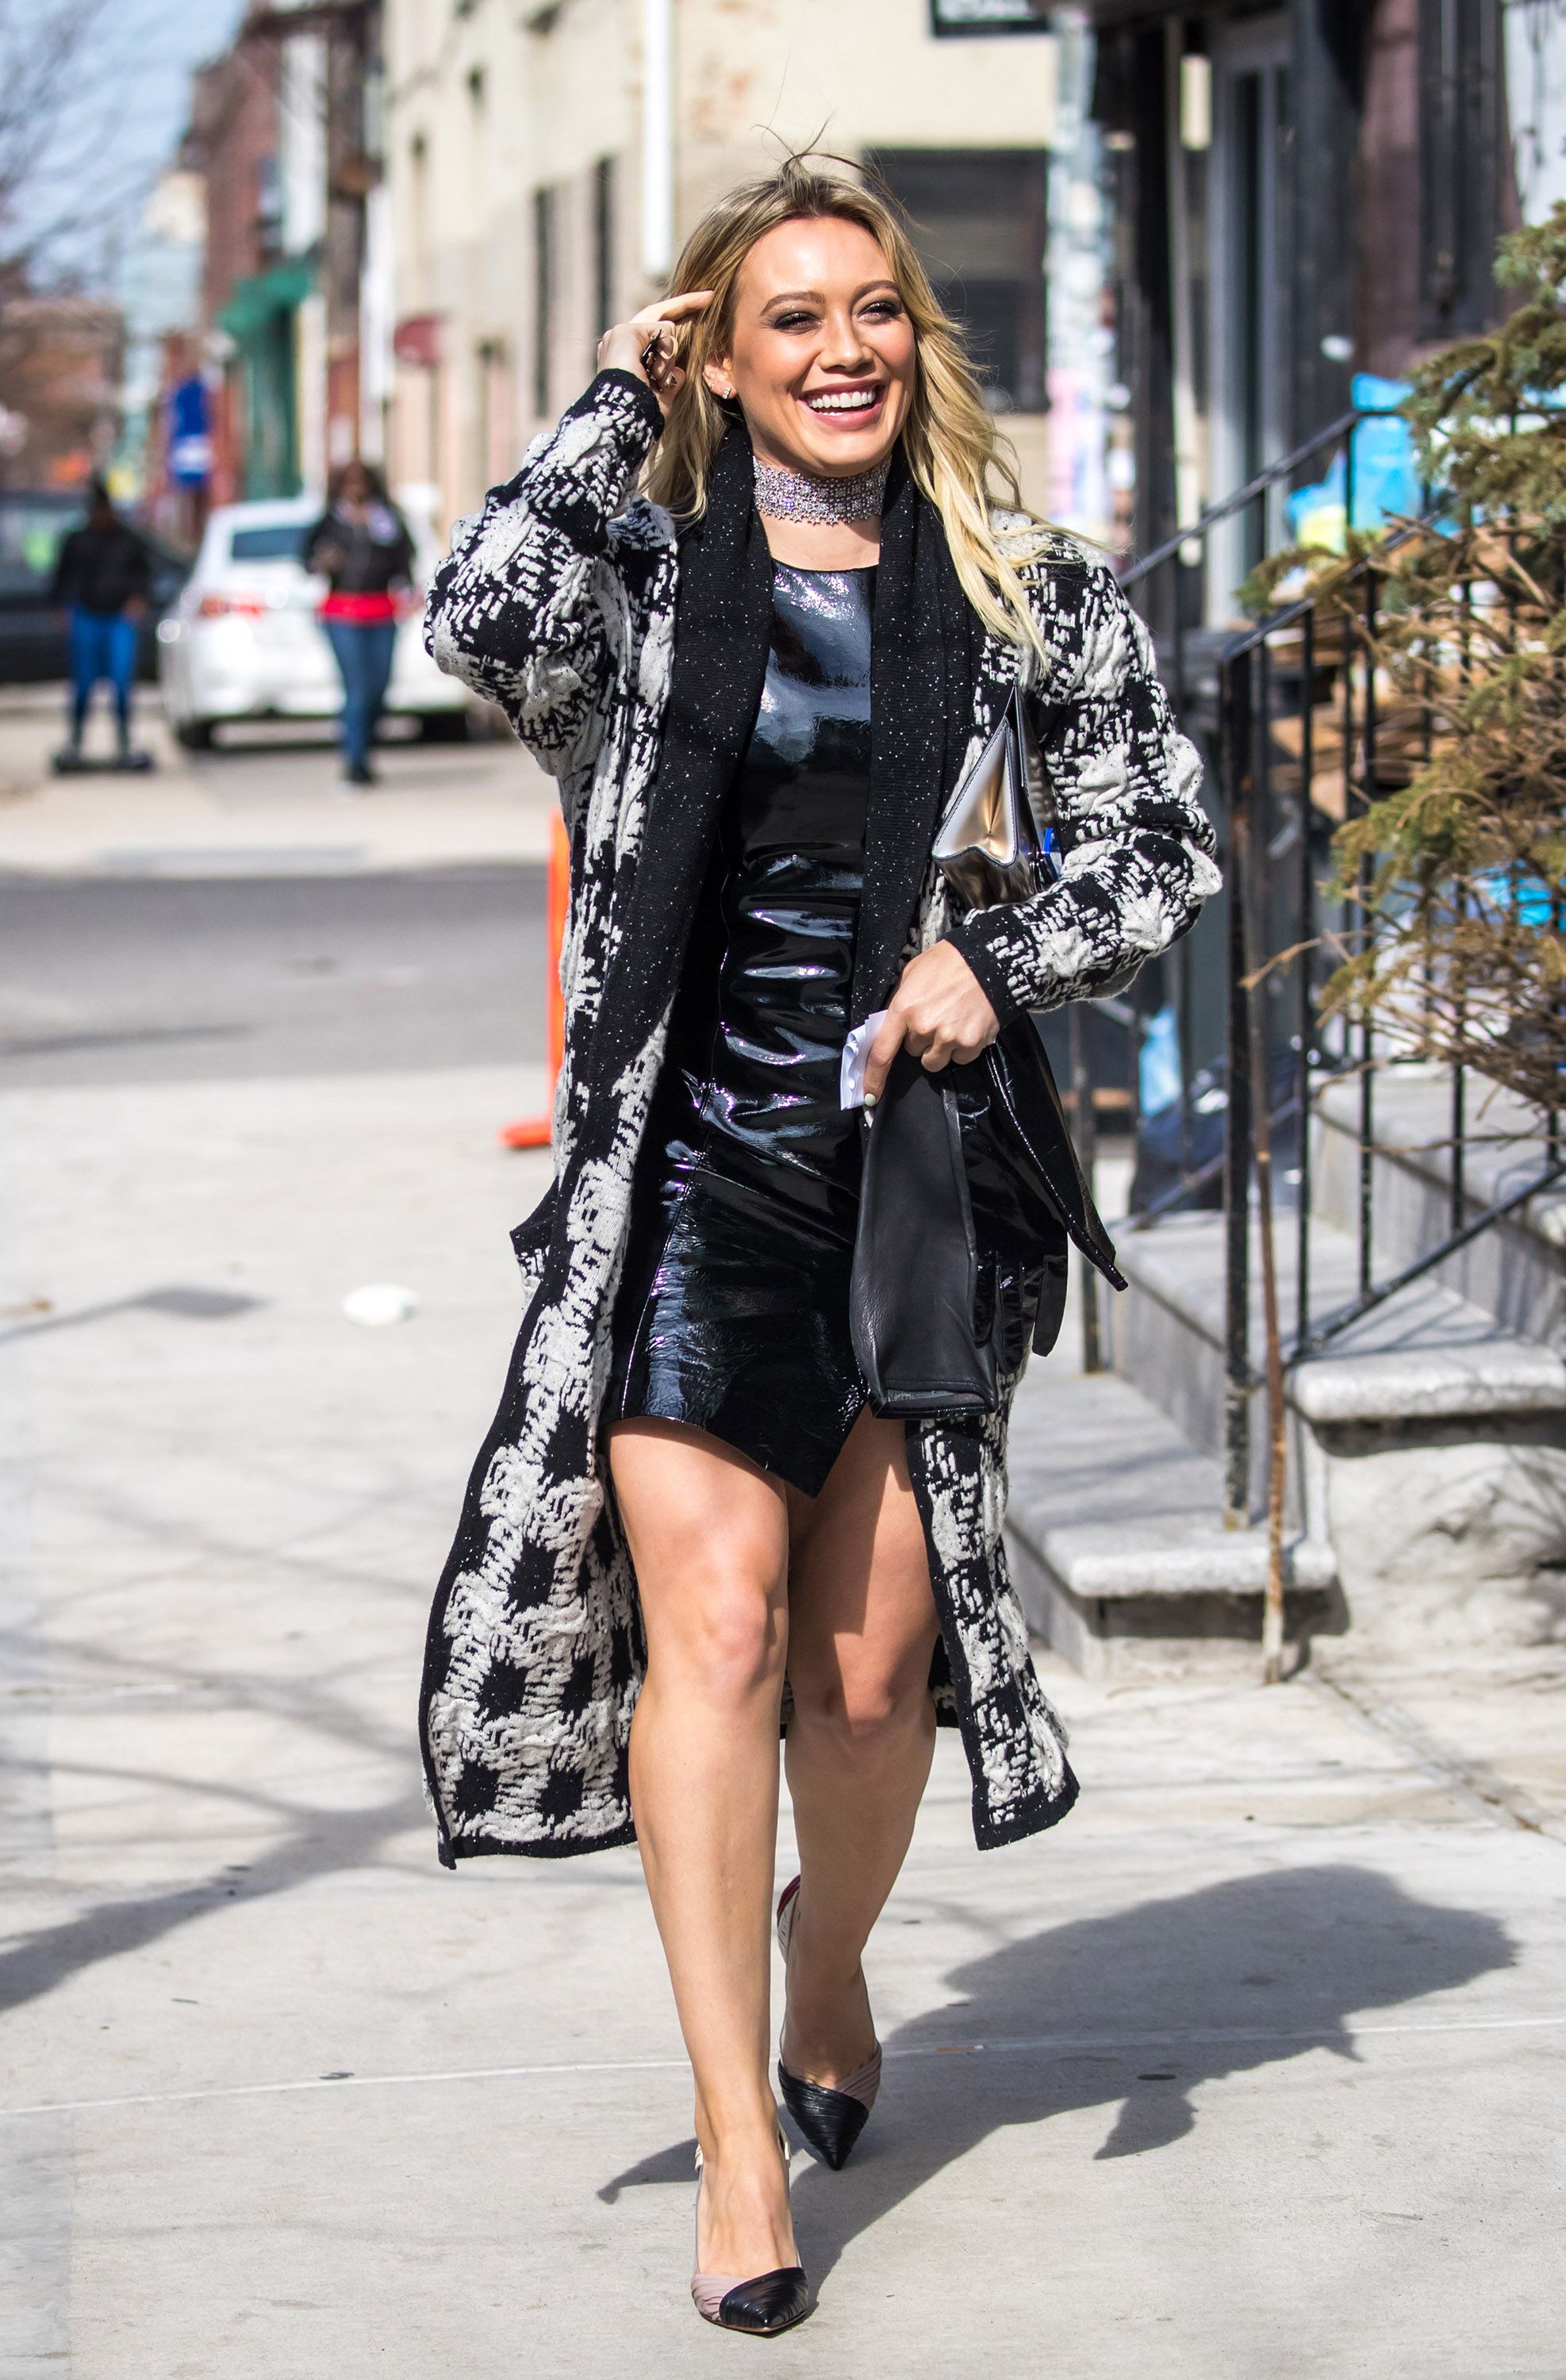 Hilary Duff Dressed In Leather, Looking Thick #79538552